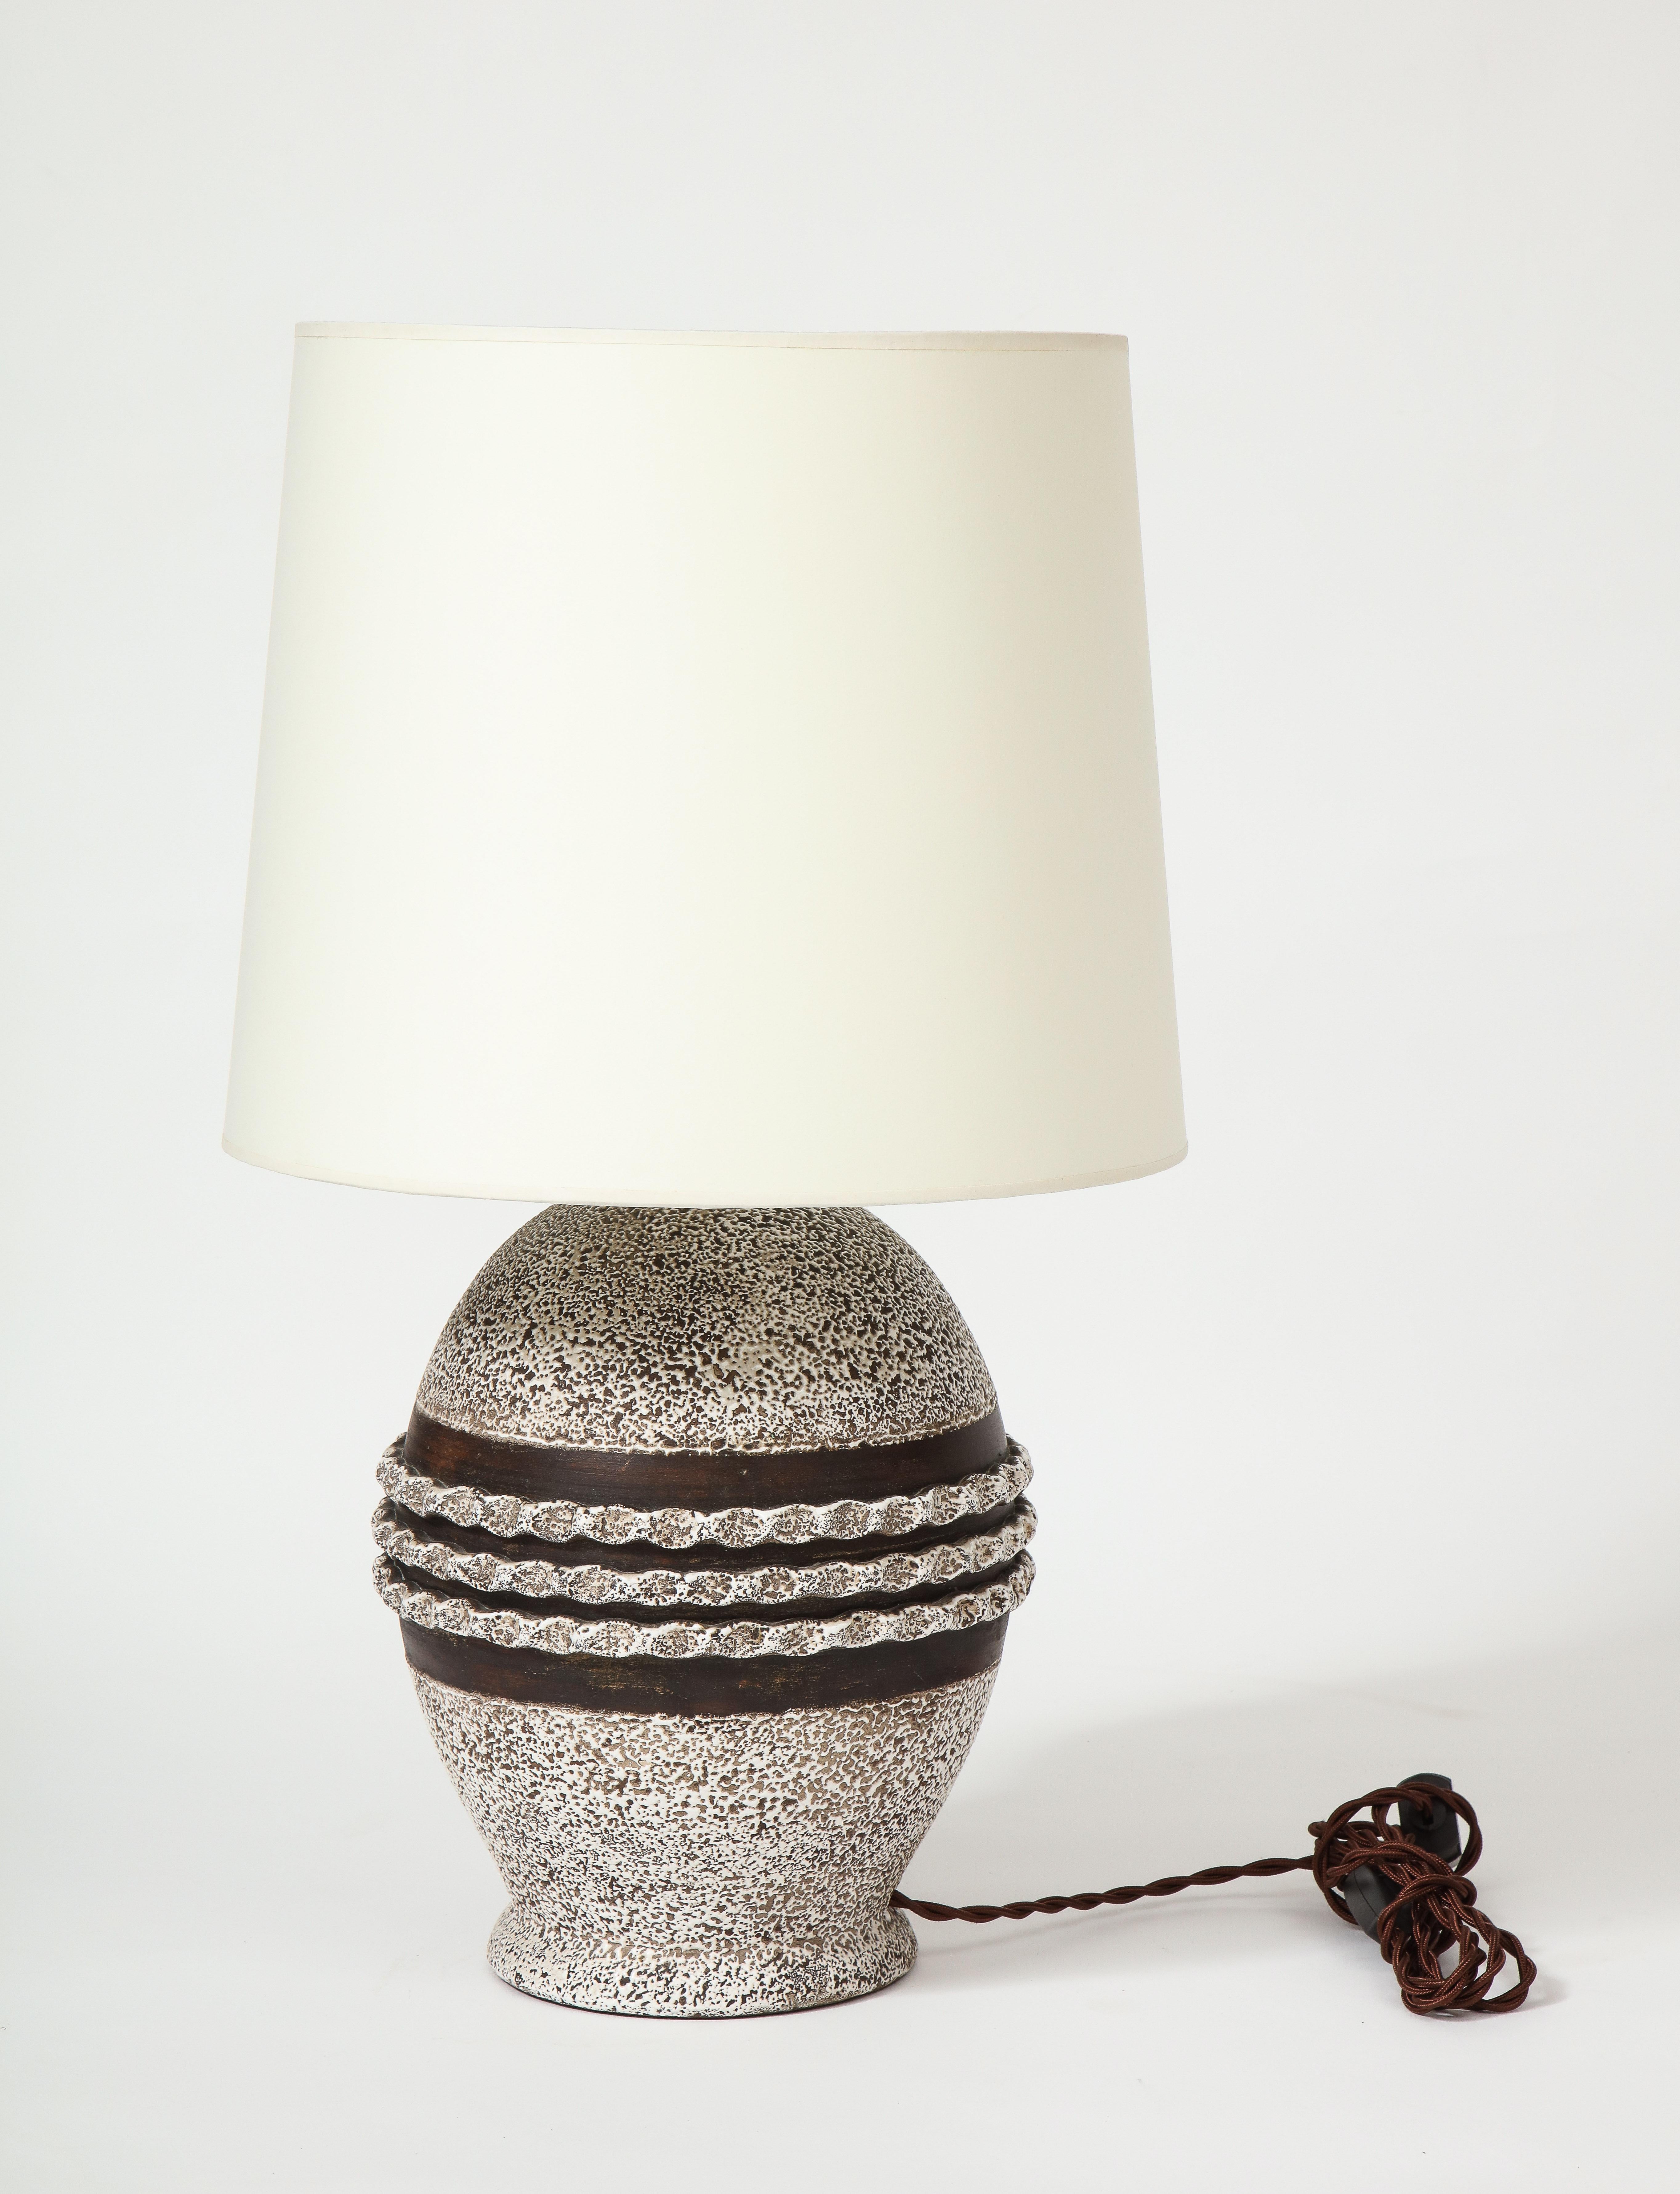 Mid-20th Century Ceramic Lamp in the Style of Jean Besnard, France, c. 1930-40